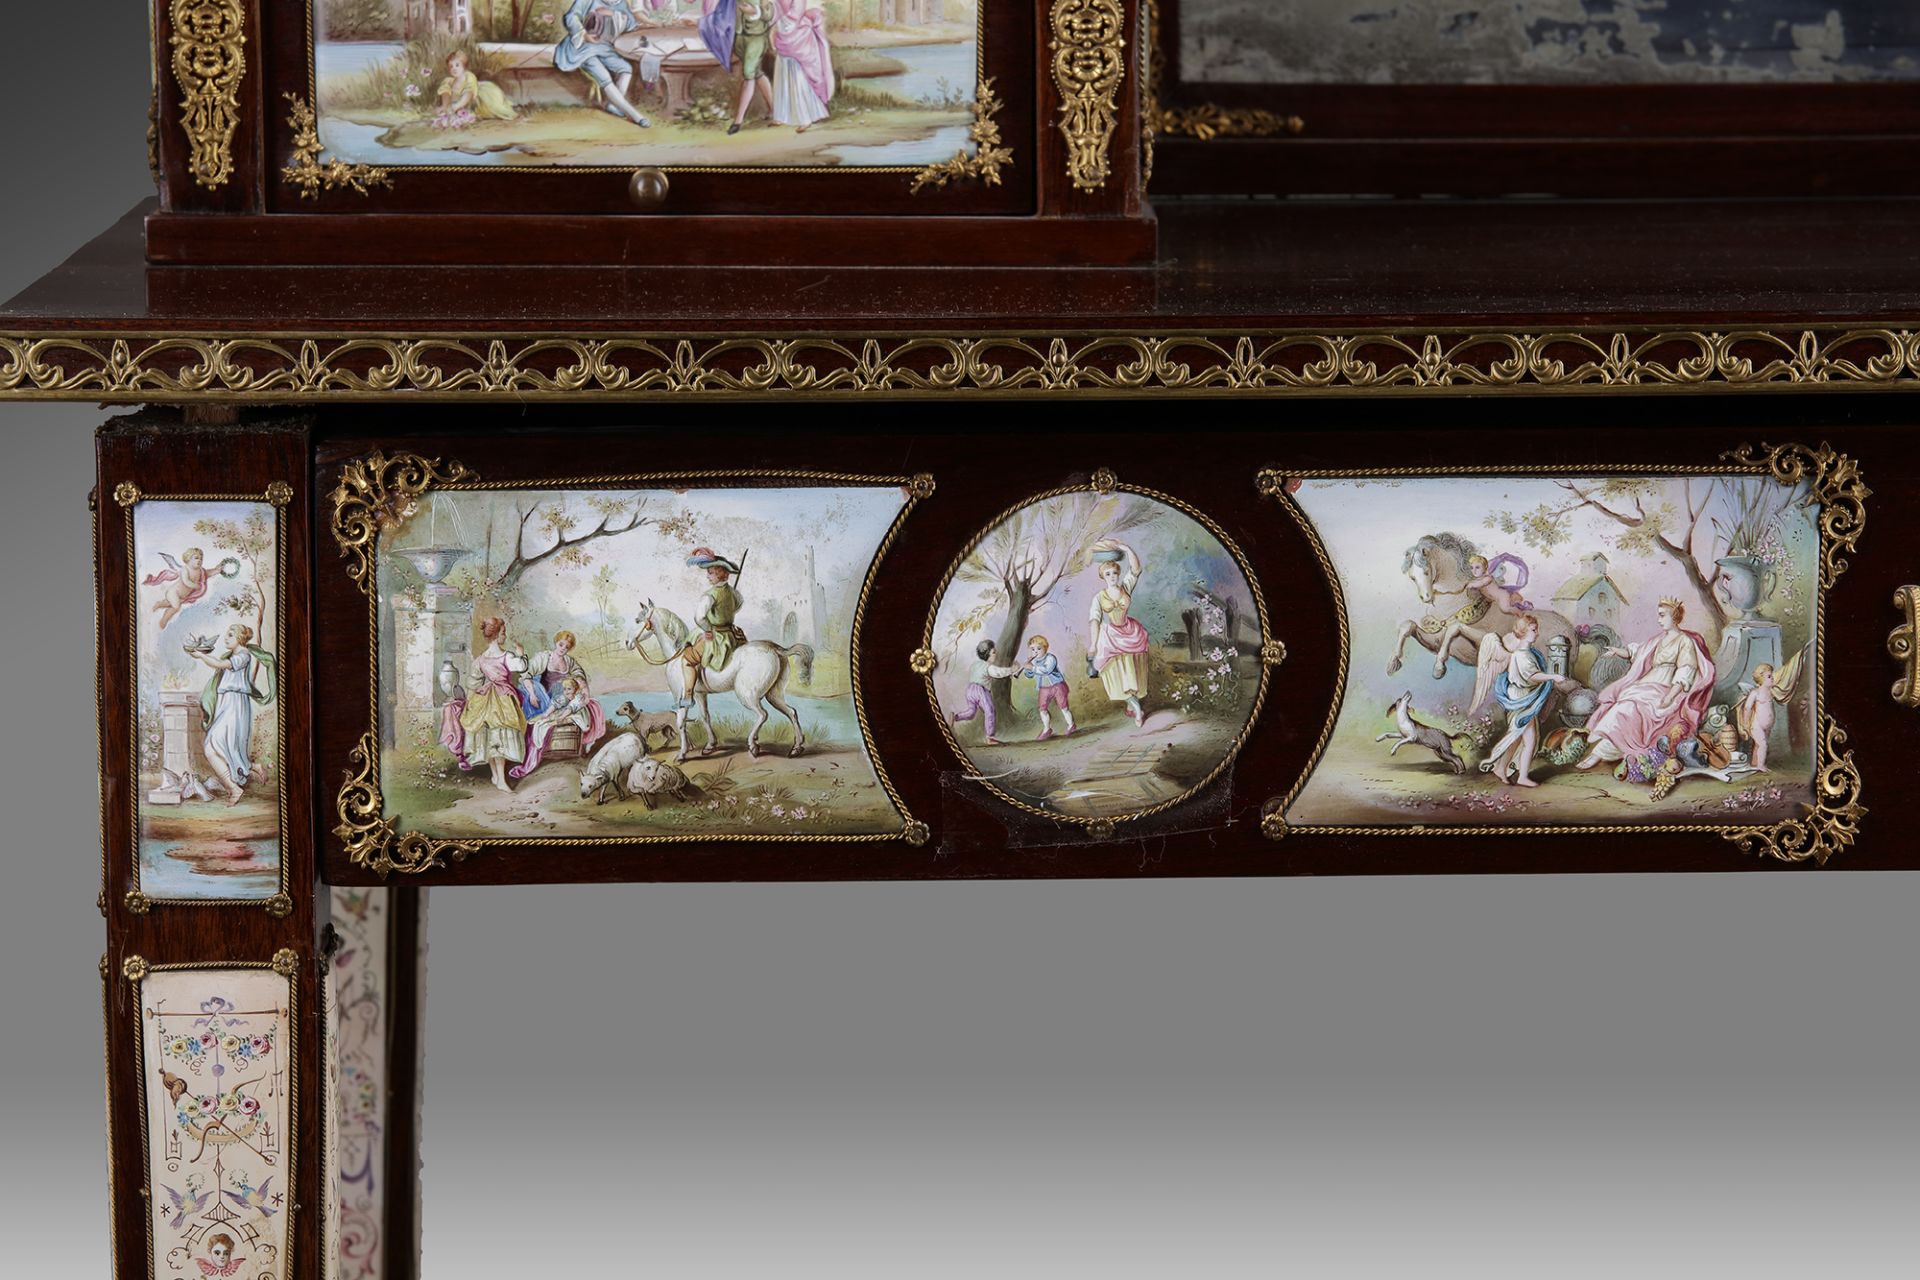 A FRENCH SECRETARY DESK WITH ENAMEL PLAQUES, LATE 19TH CENTURY - Image 5 of 6